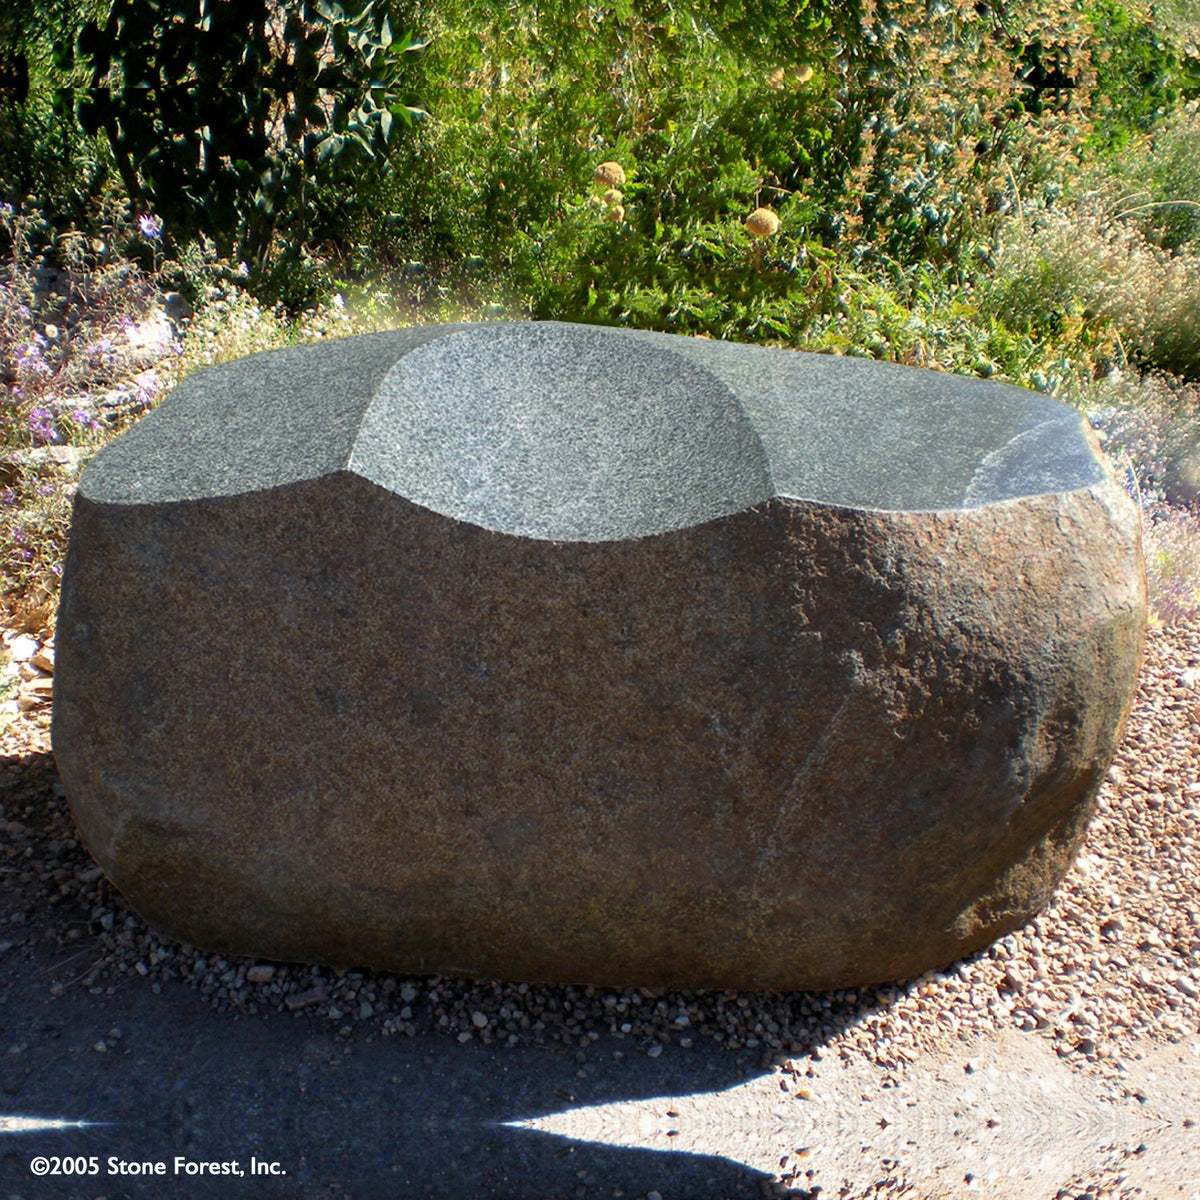 One of a kind Sculptural Barrier / stone seat, carved from a solid block of granite image 1 of 1